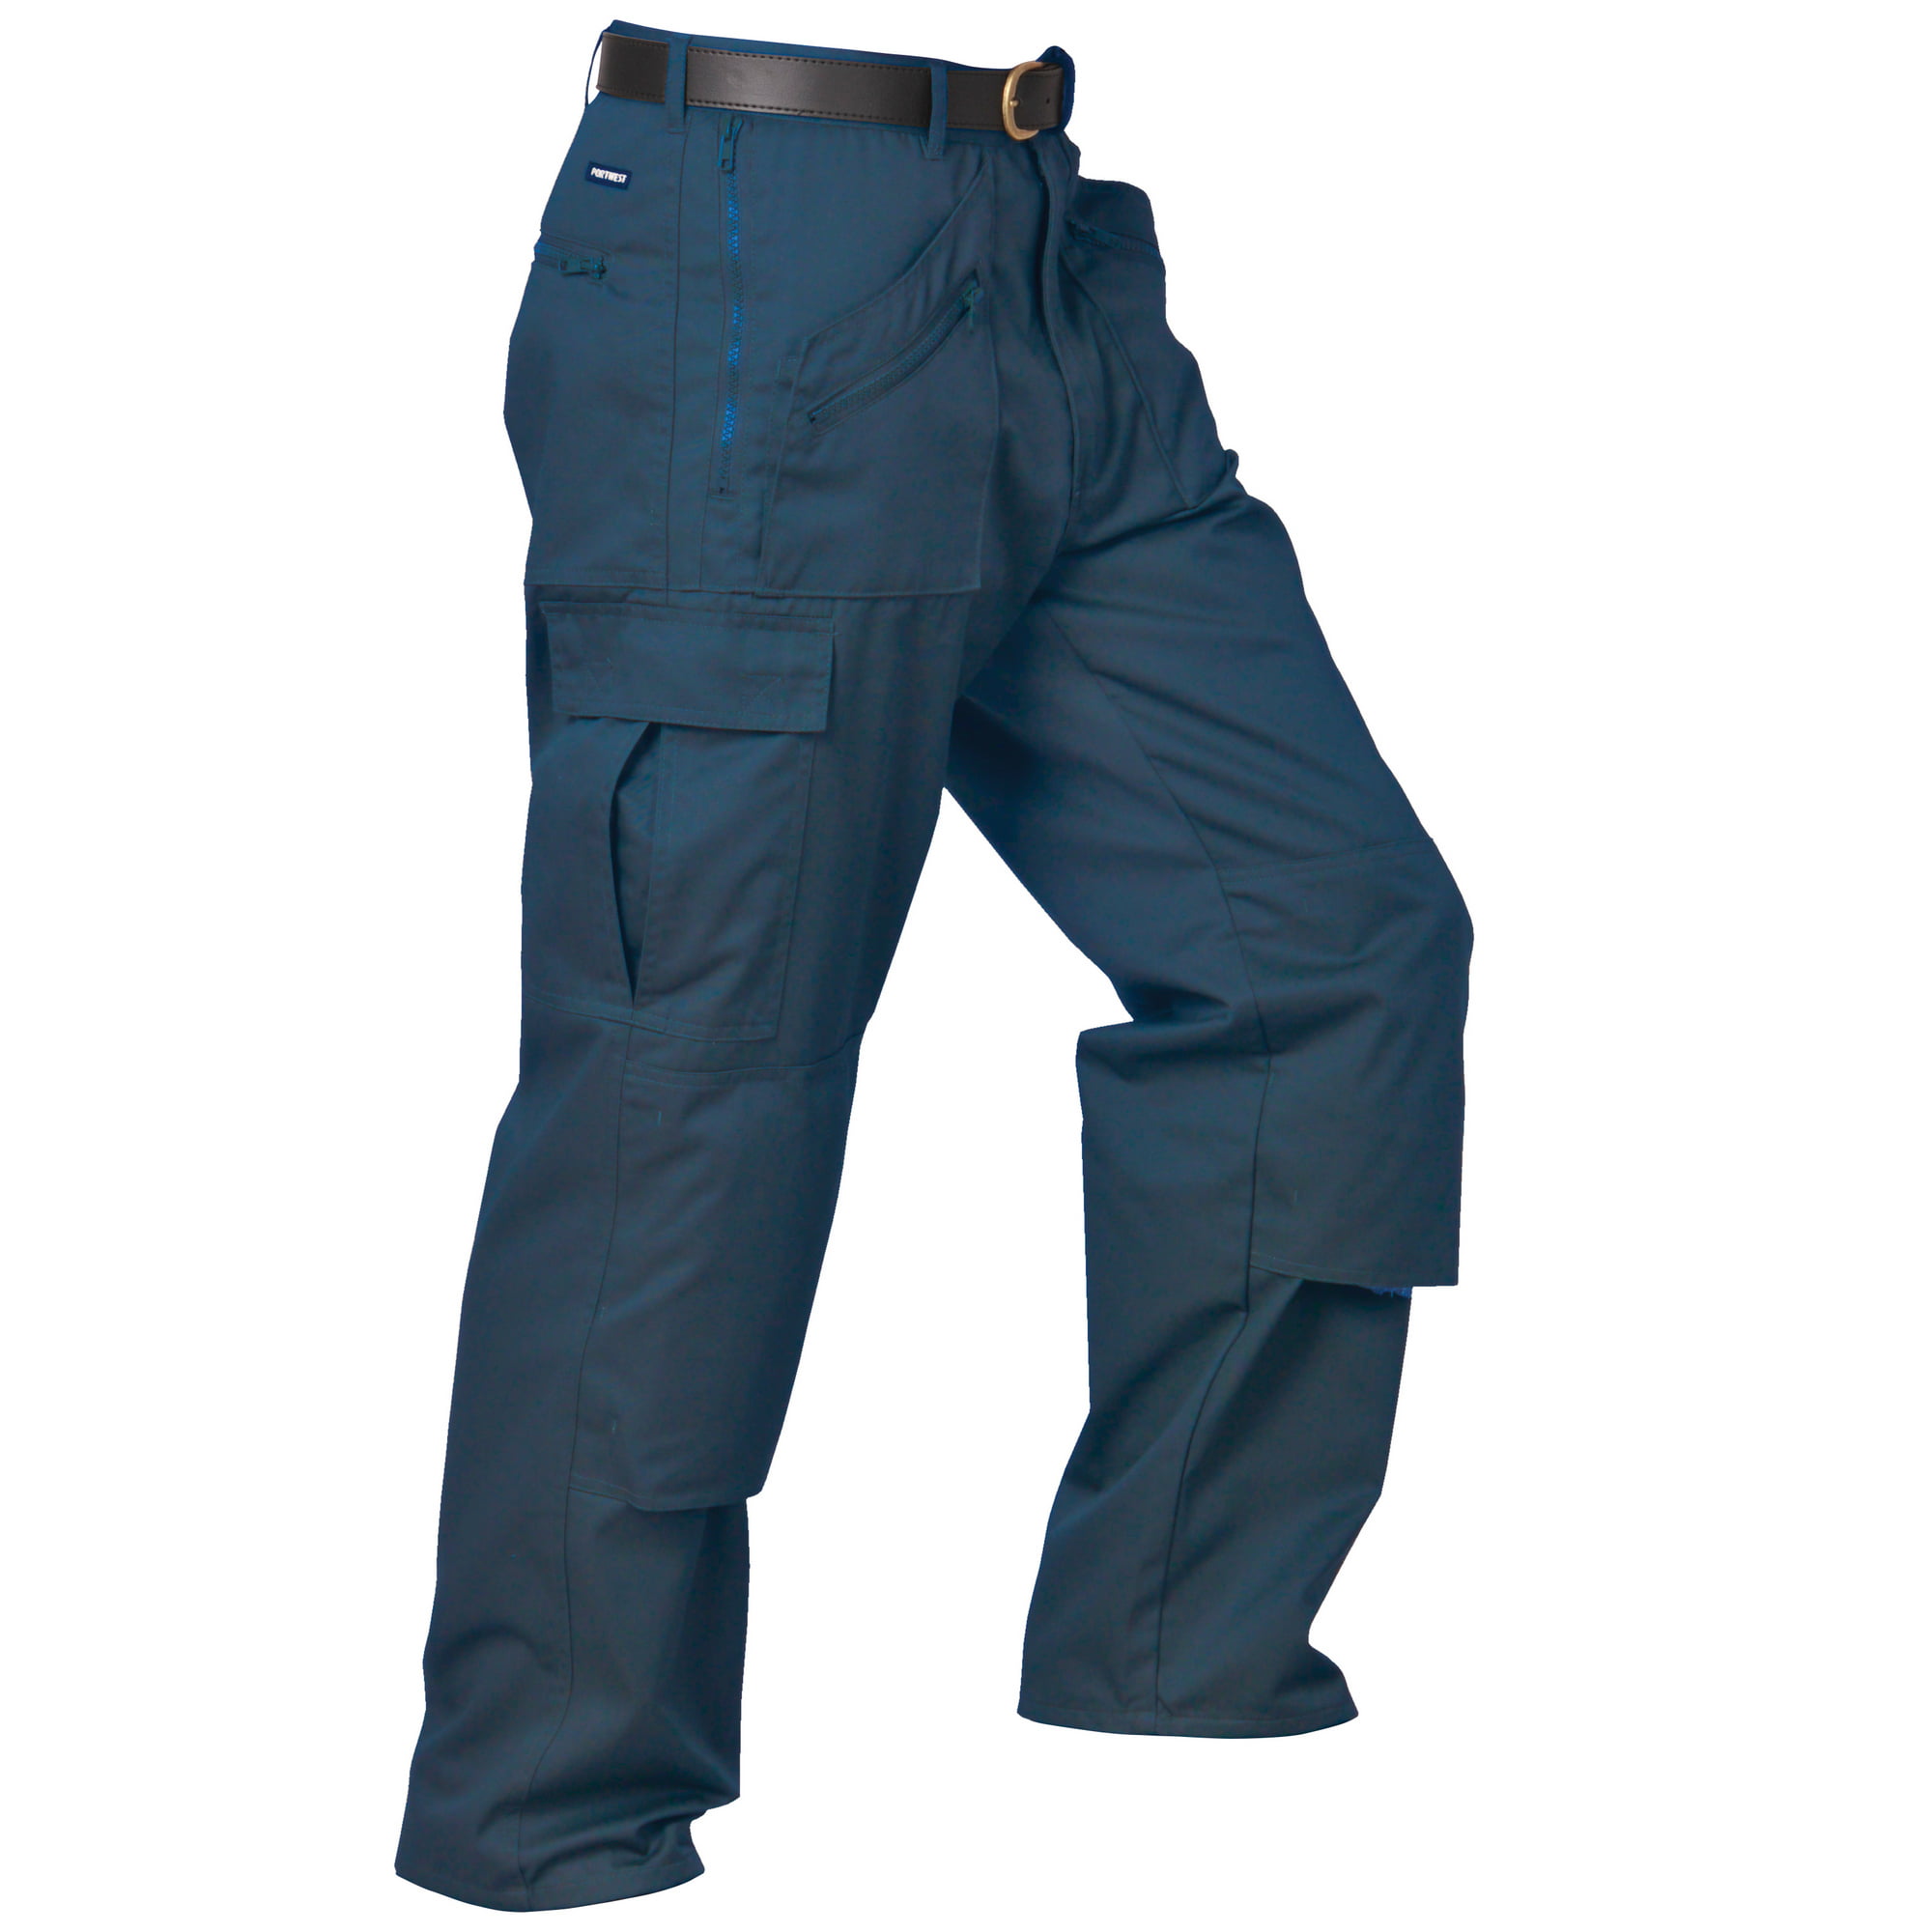 Portwest Classic Work Wear Action Trousers with Zip Pockets Black or Navy 